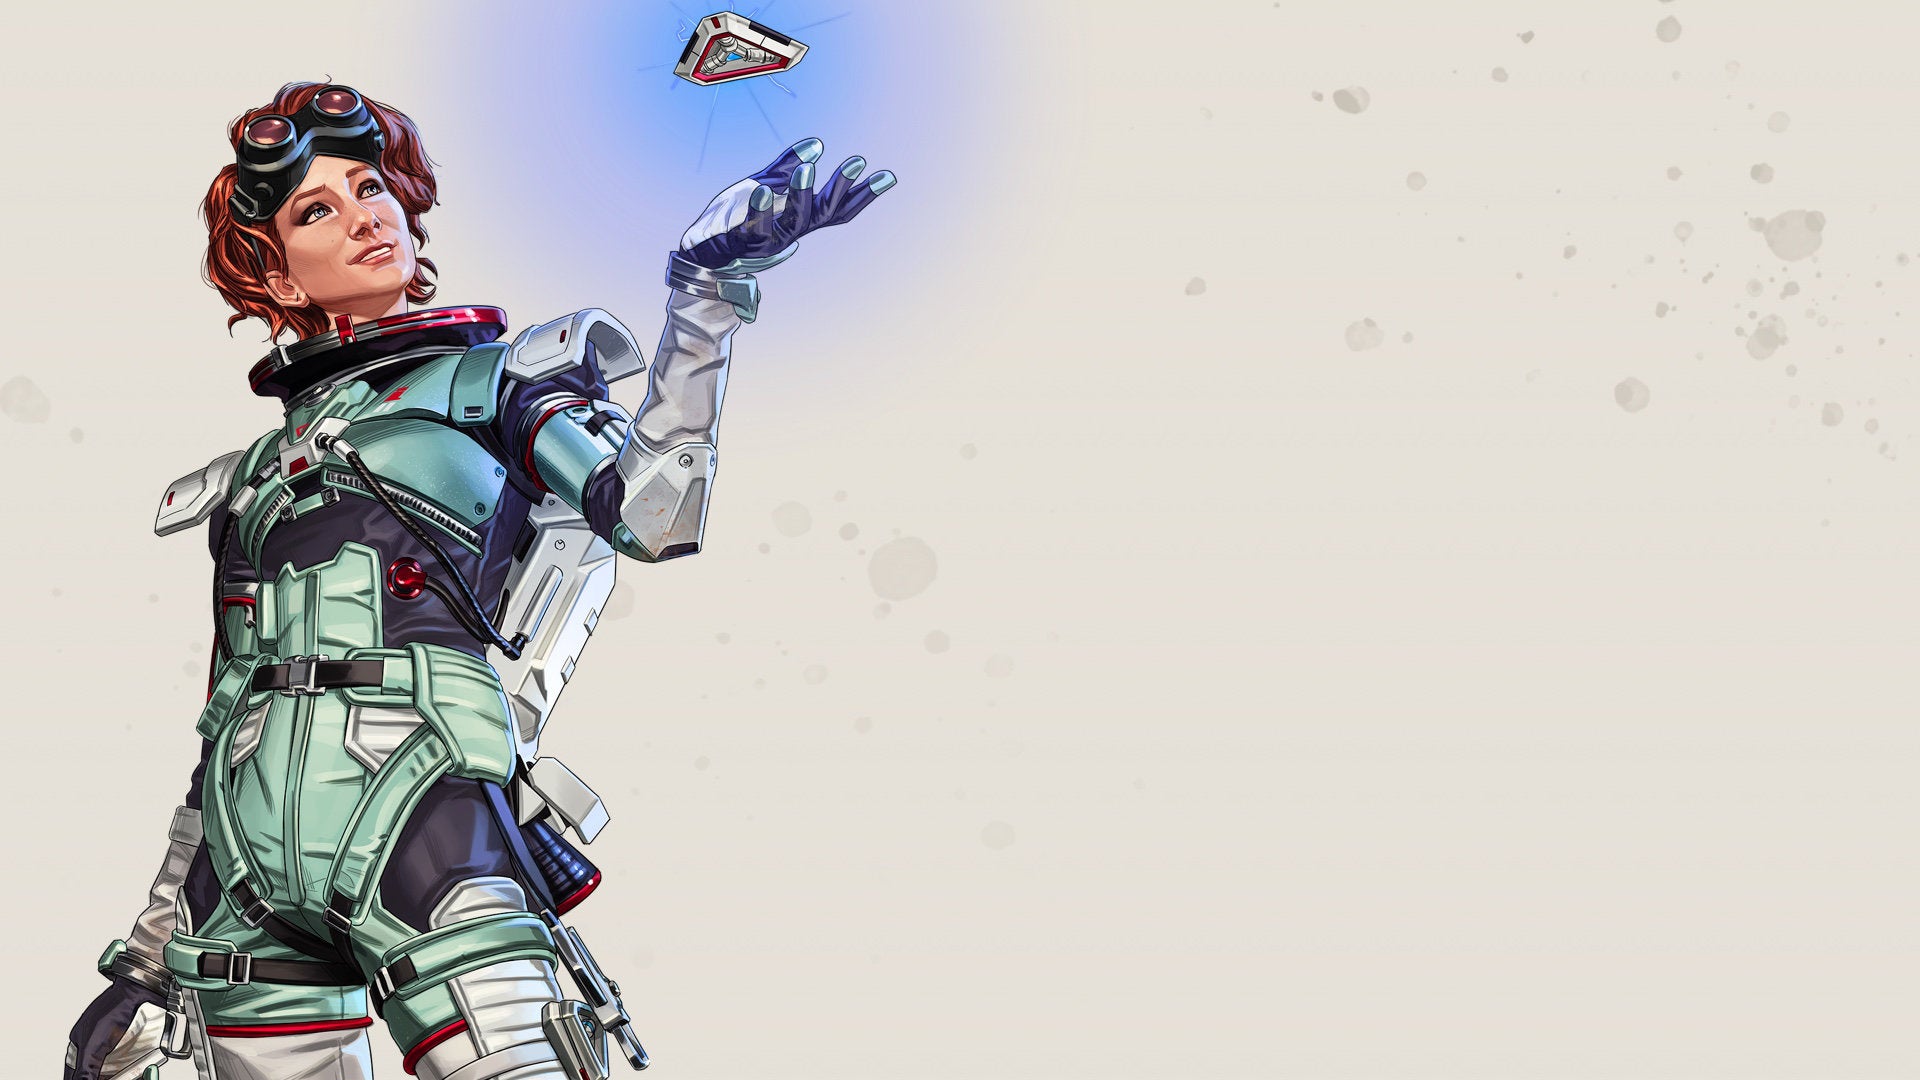 Official art of Horizon, one of the Apex Legends characters.